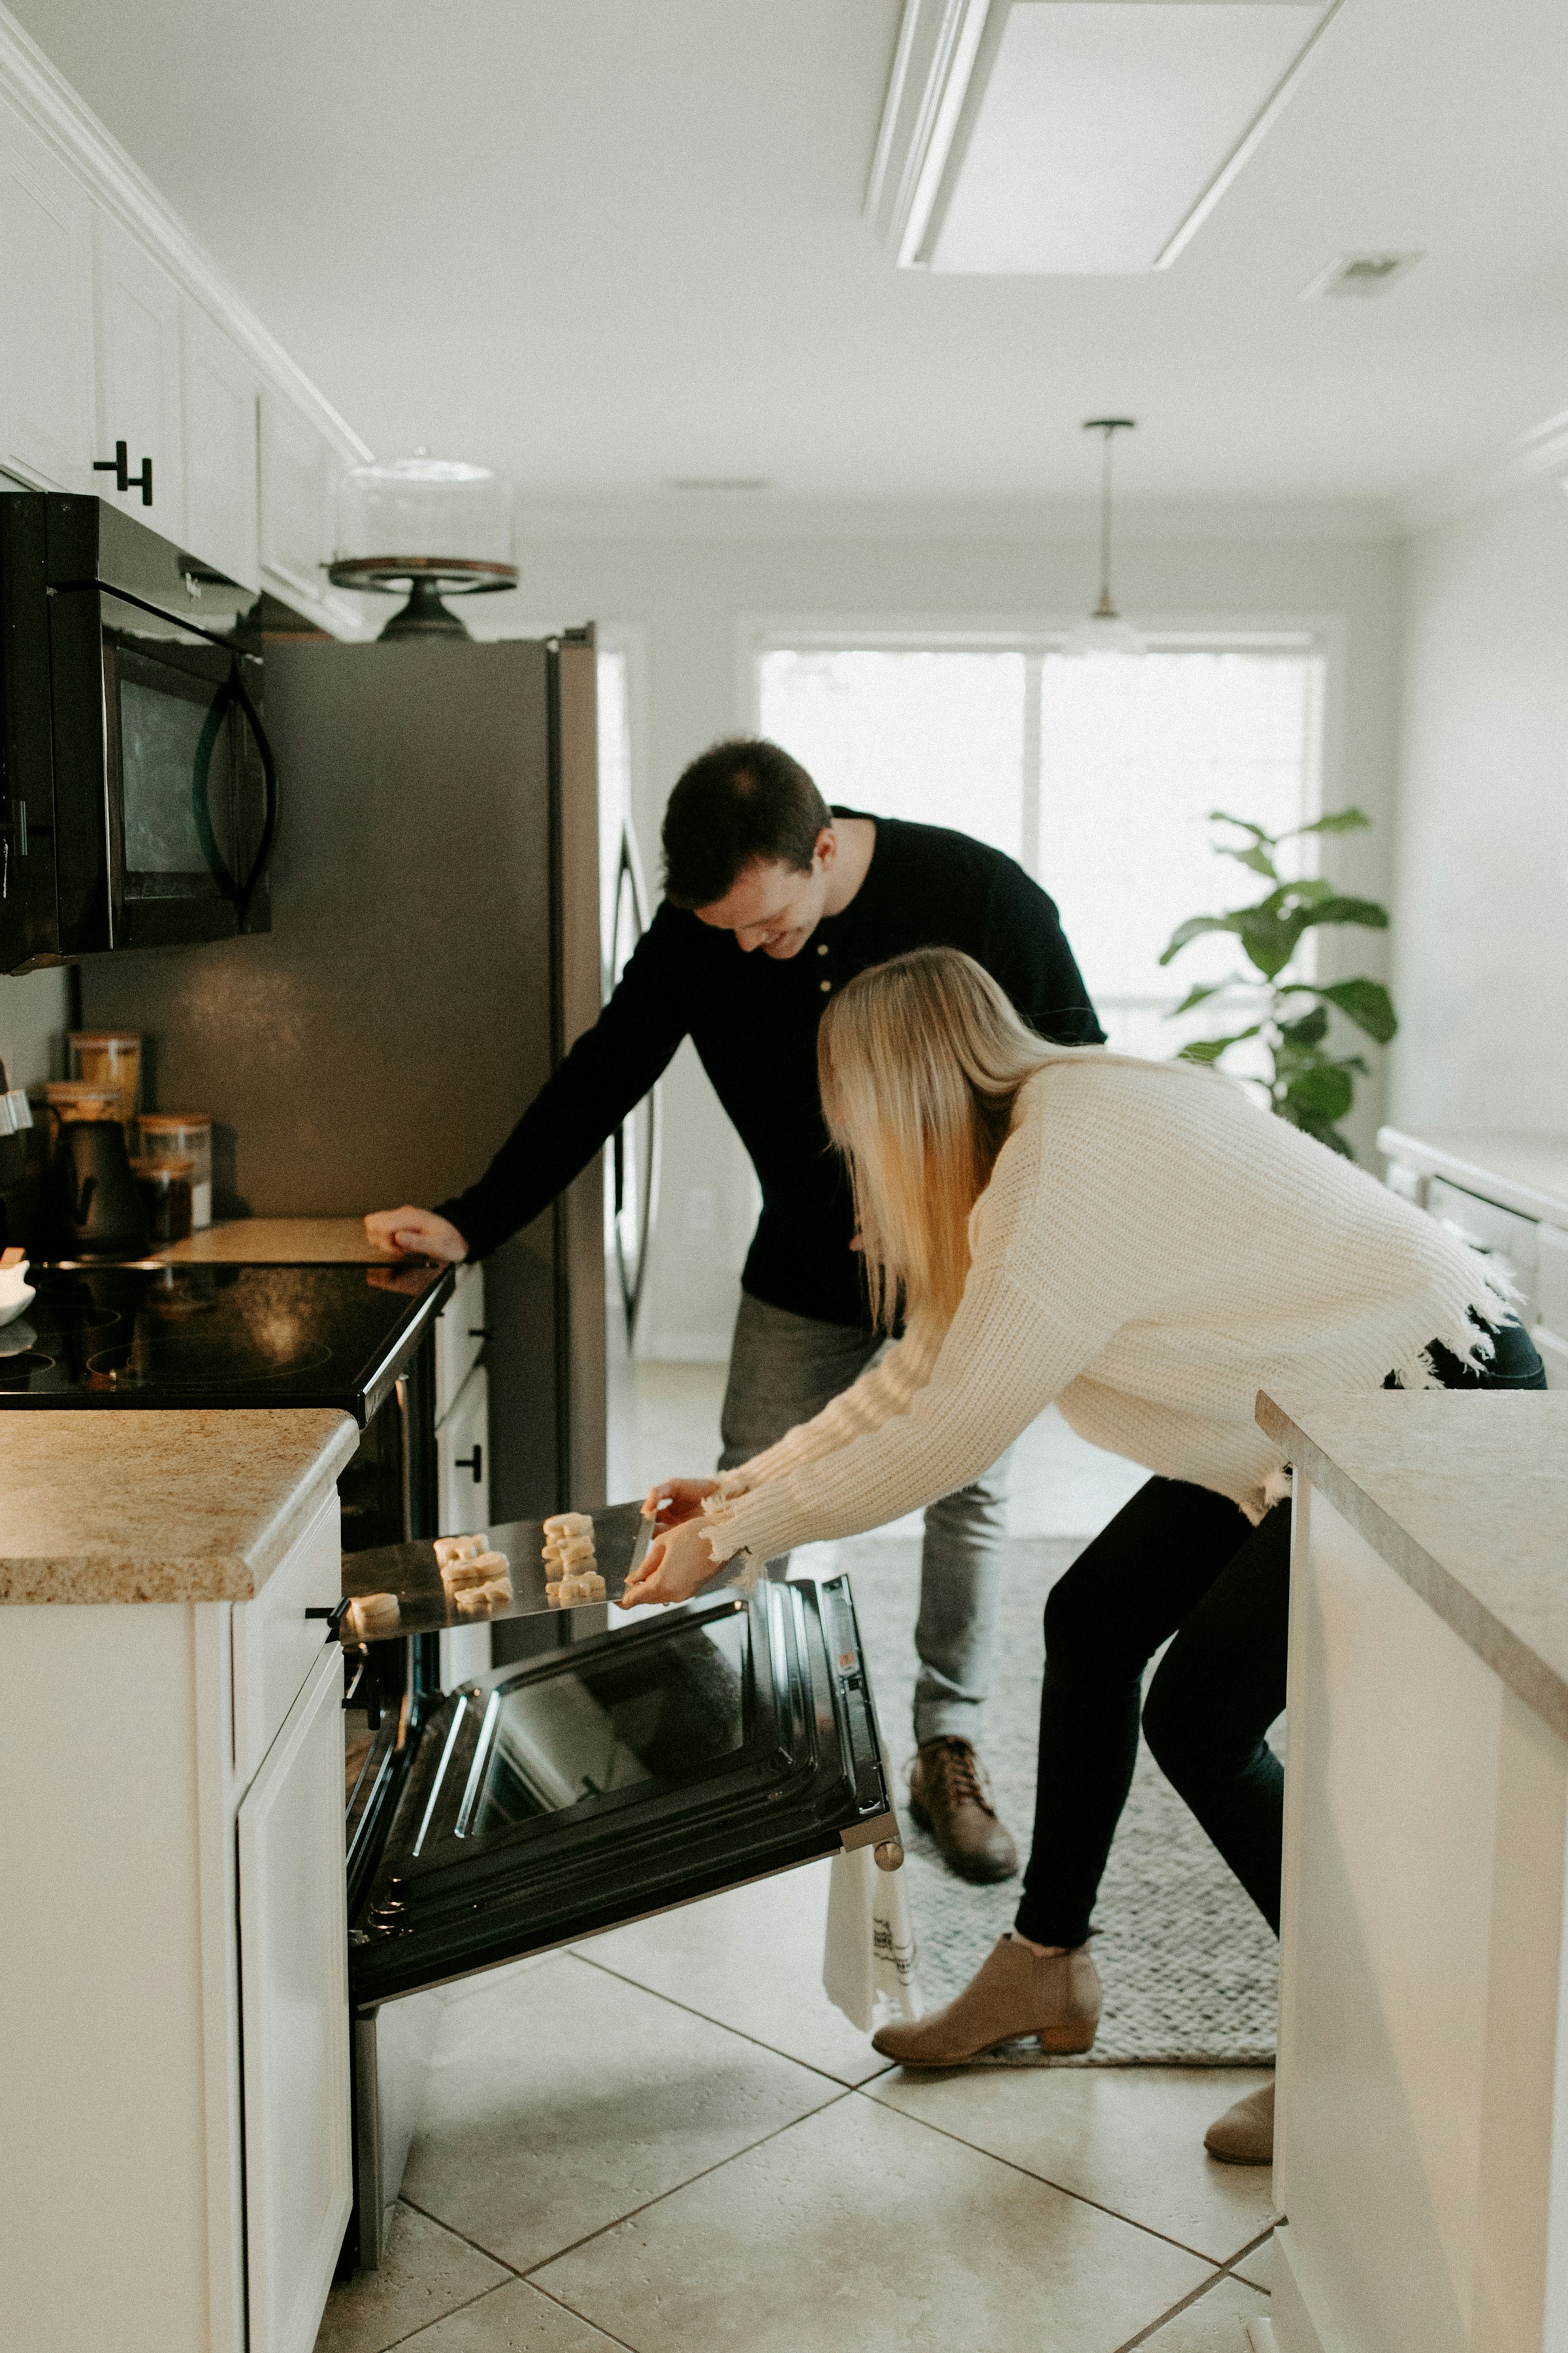 A couple cooking together | Source: Unsplash